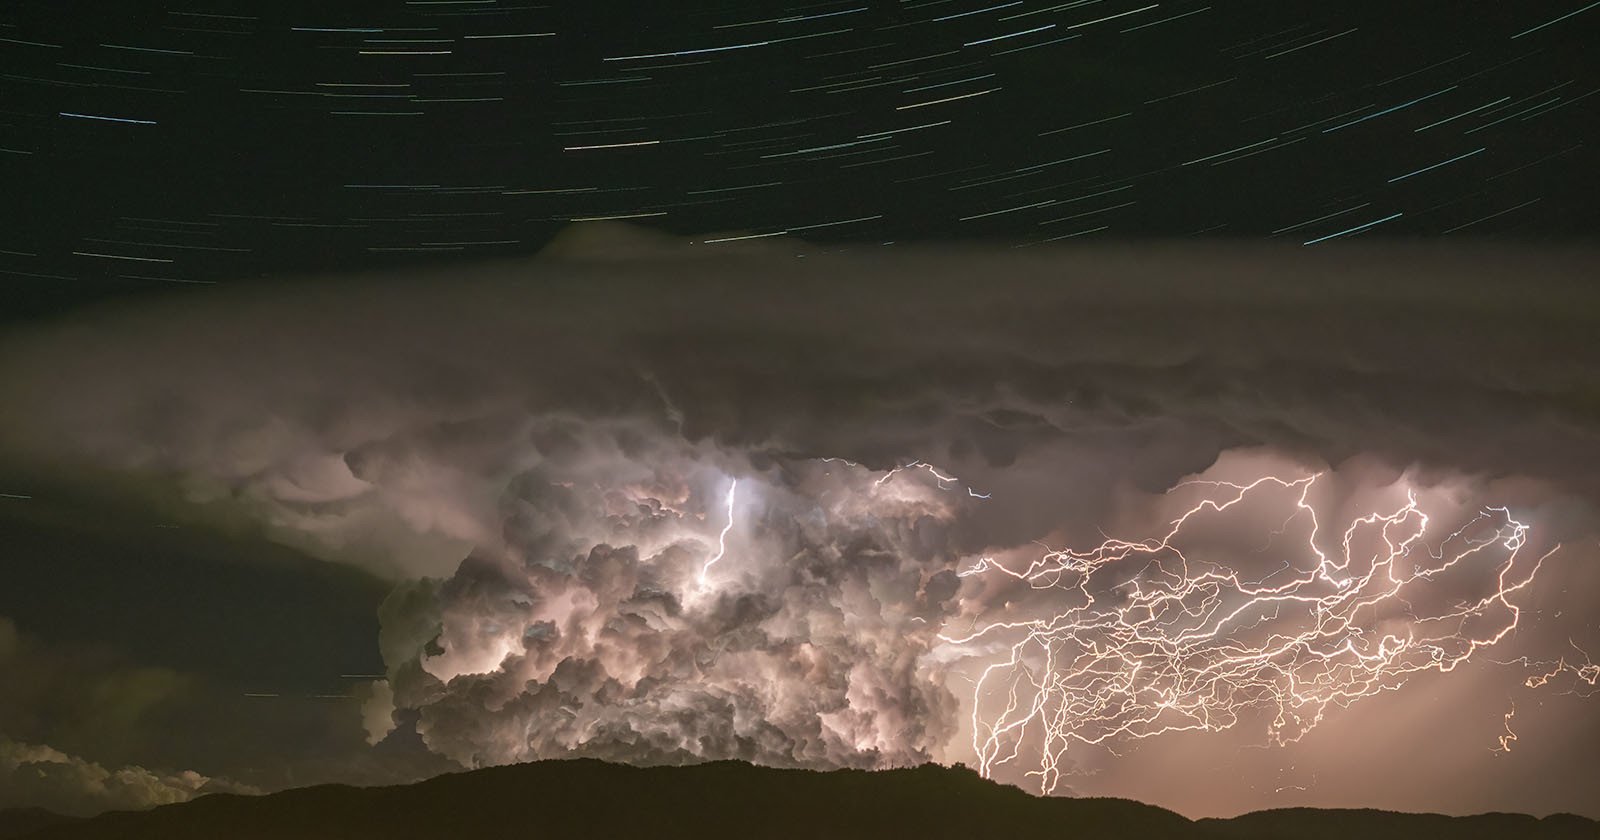 Epic Lightning Storm and Swirling Star Trails Caught in One Incredible Photo